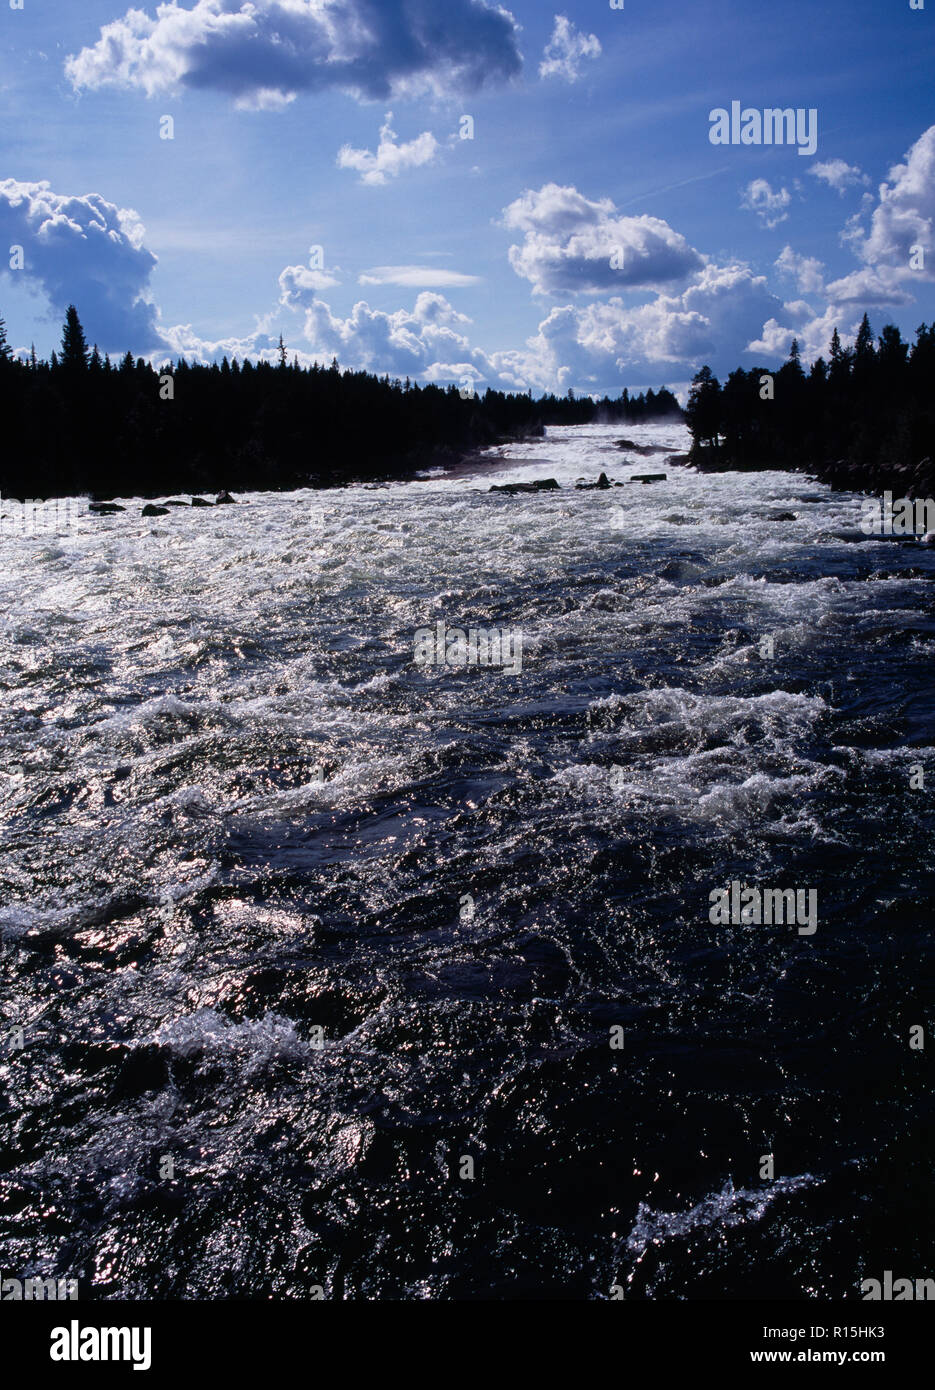 Sweden, Norrbotten, Pitealven River, View up Storforsen Rapids twenty-five miles north west of Alusbyn town. Expanse of fast flowing sparkling water and silhouetted tree line. A fall of 80 metres at a rate of 800 000 litres per second over 4 kilometres. Stock Photo